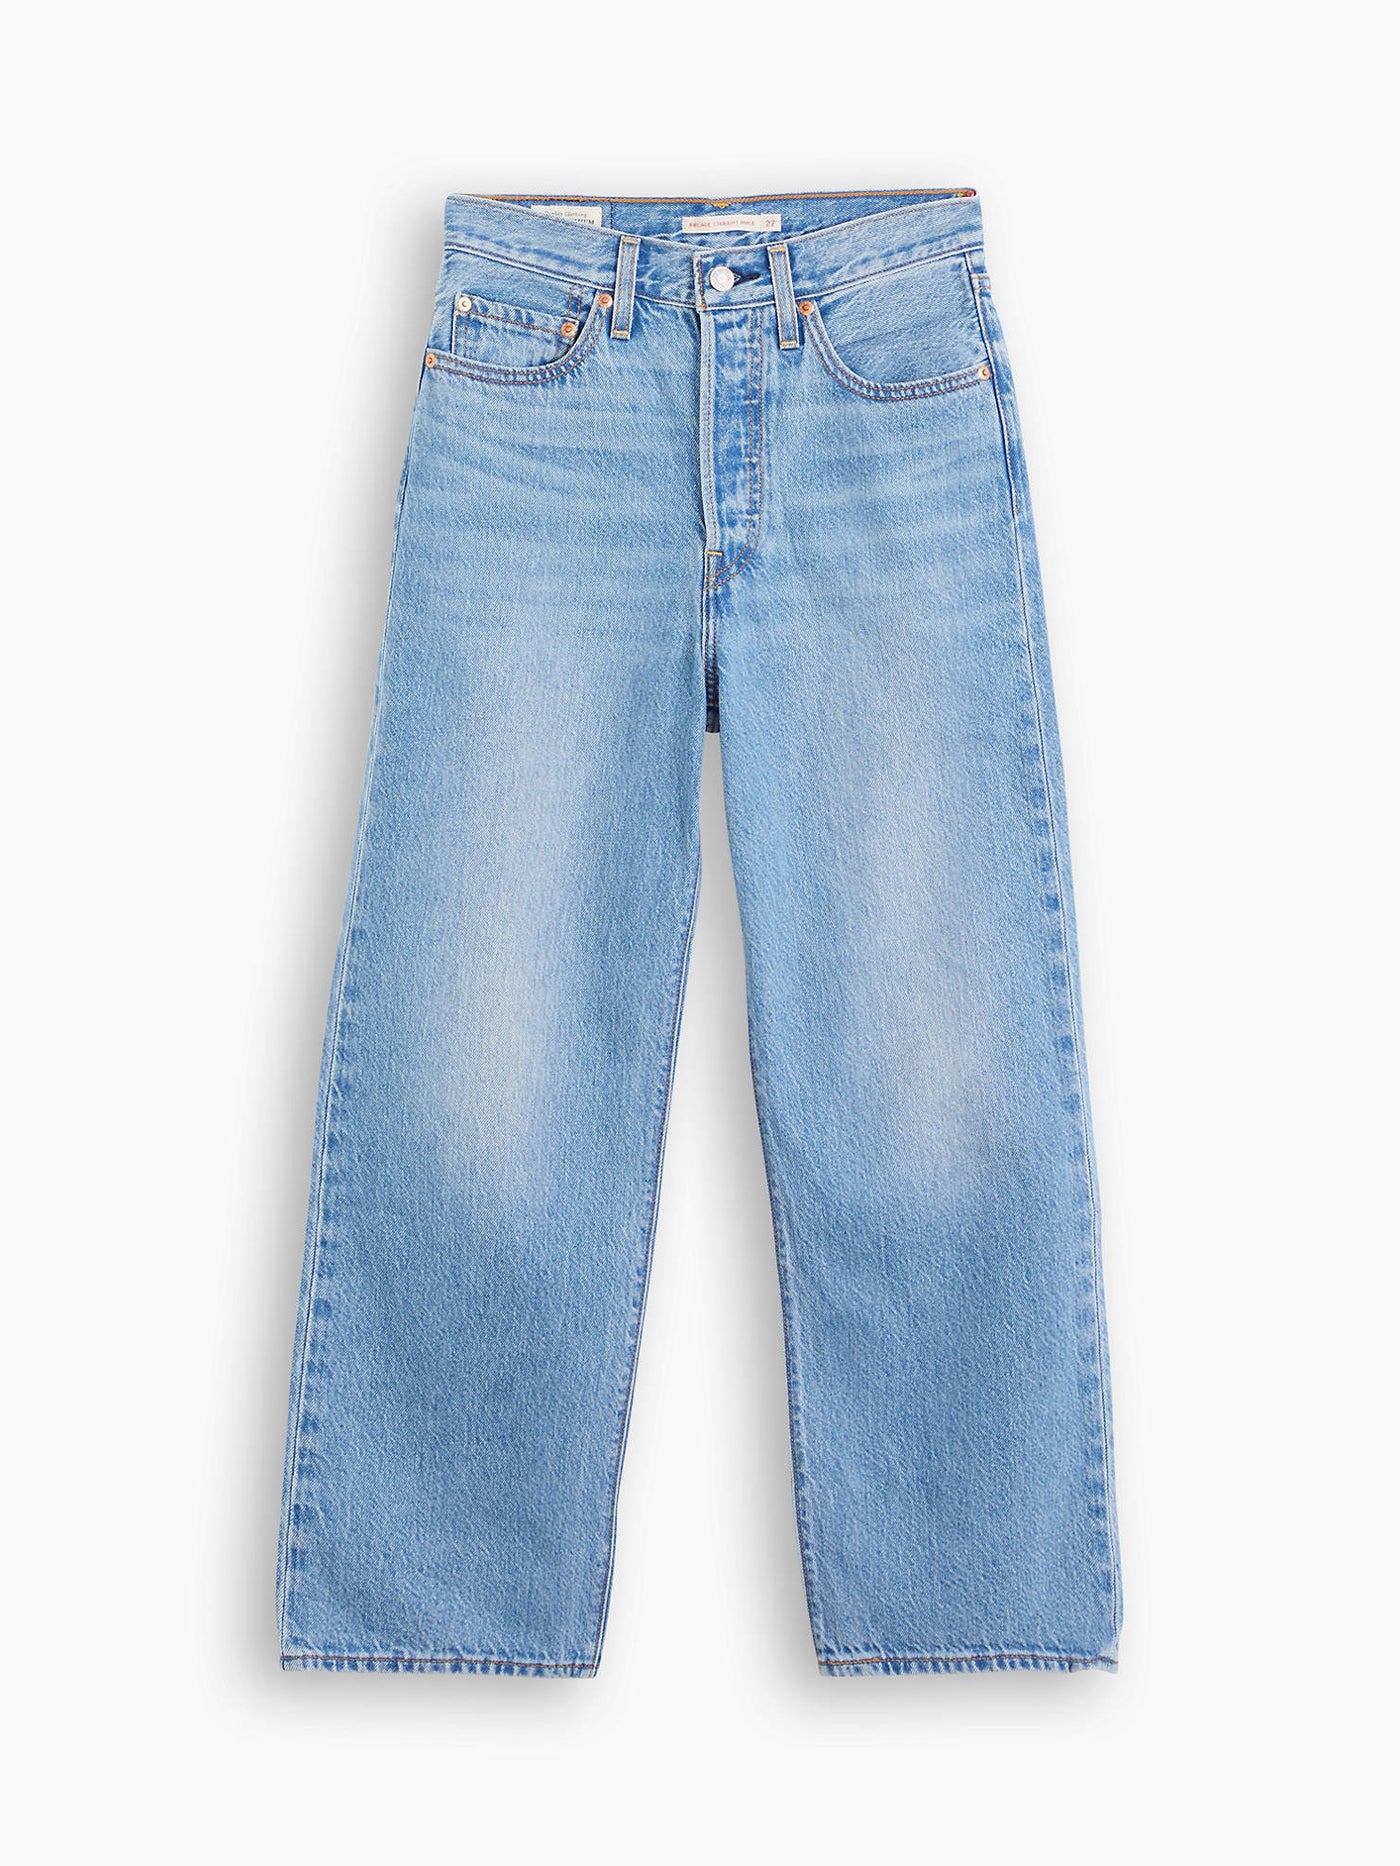 Levis Ribcage Straight Ankle Light Indigo Worn In Jeans